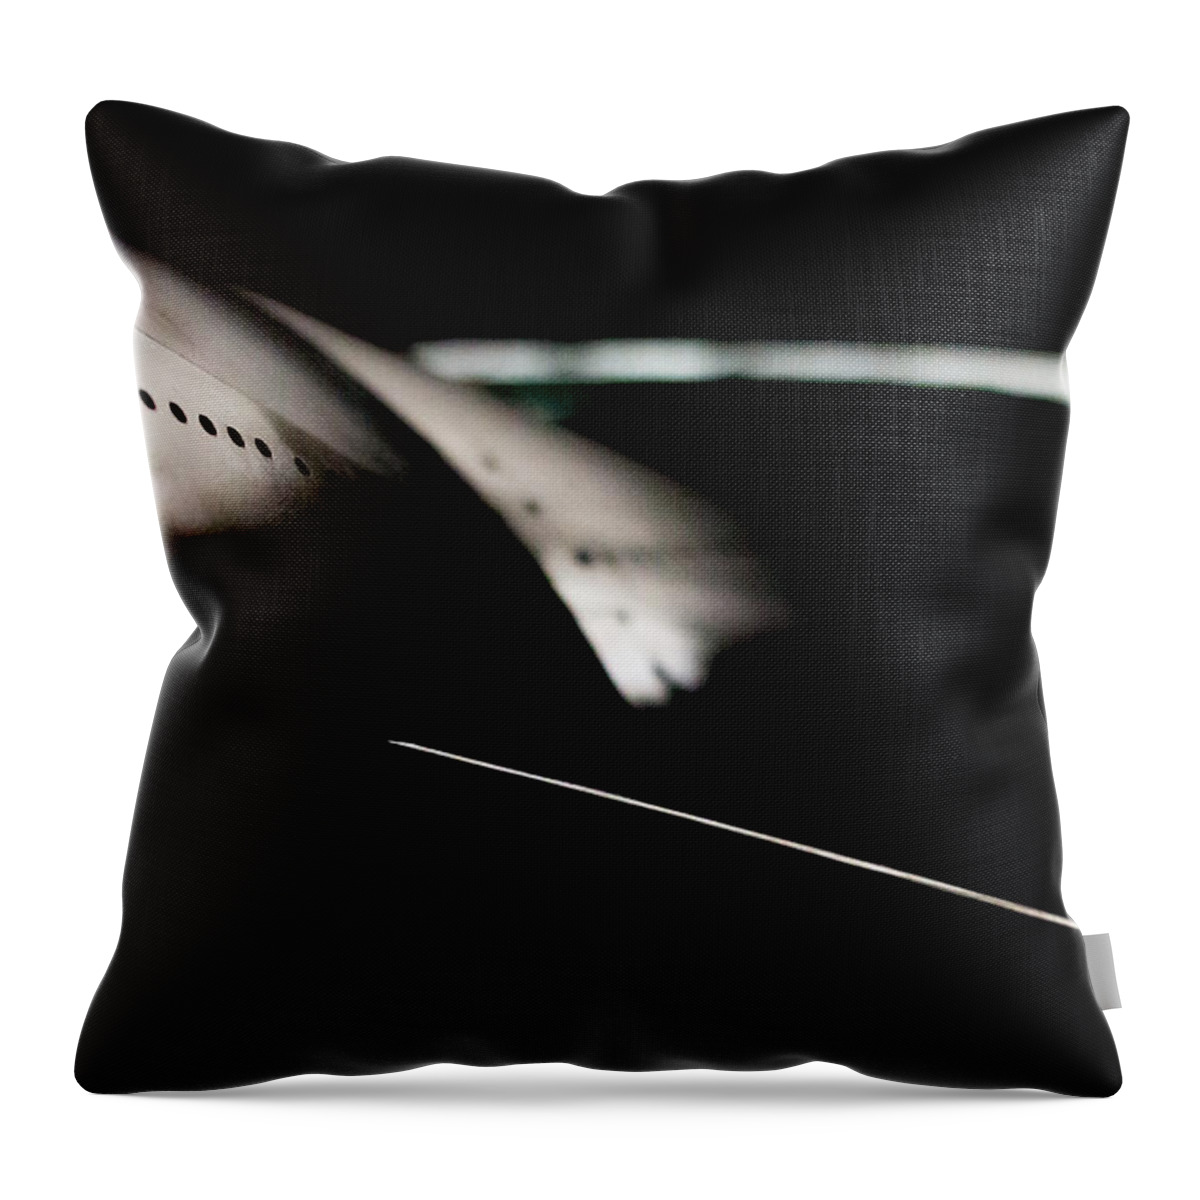 Engine Throw Pillow featuring the photograph The Engine by Paul Job